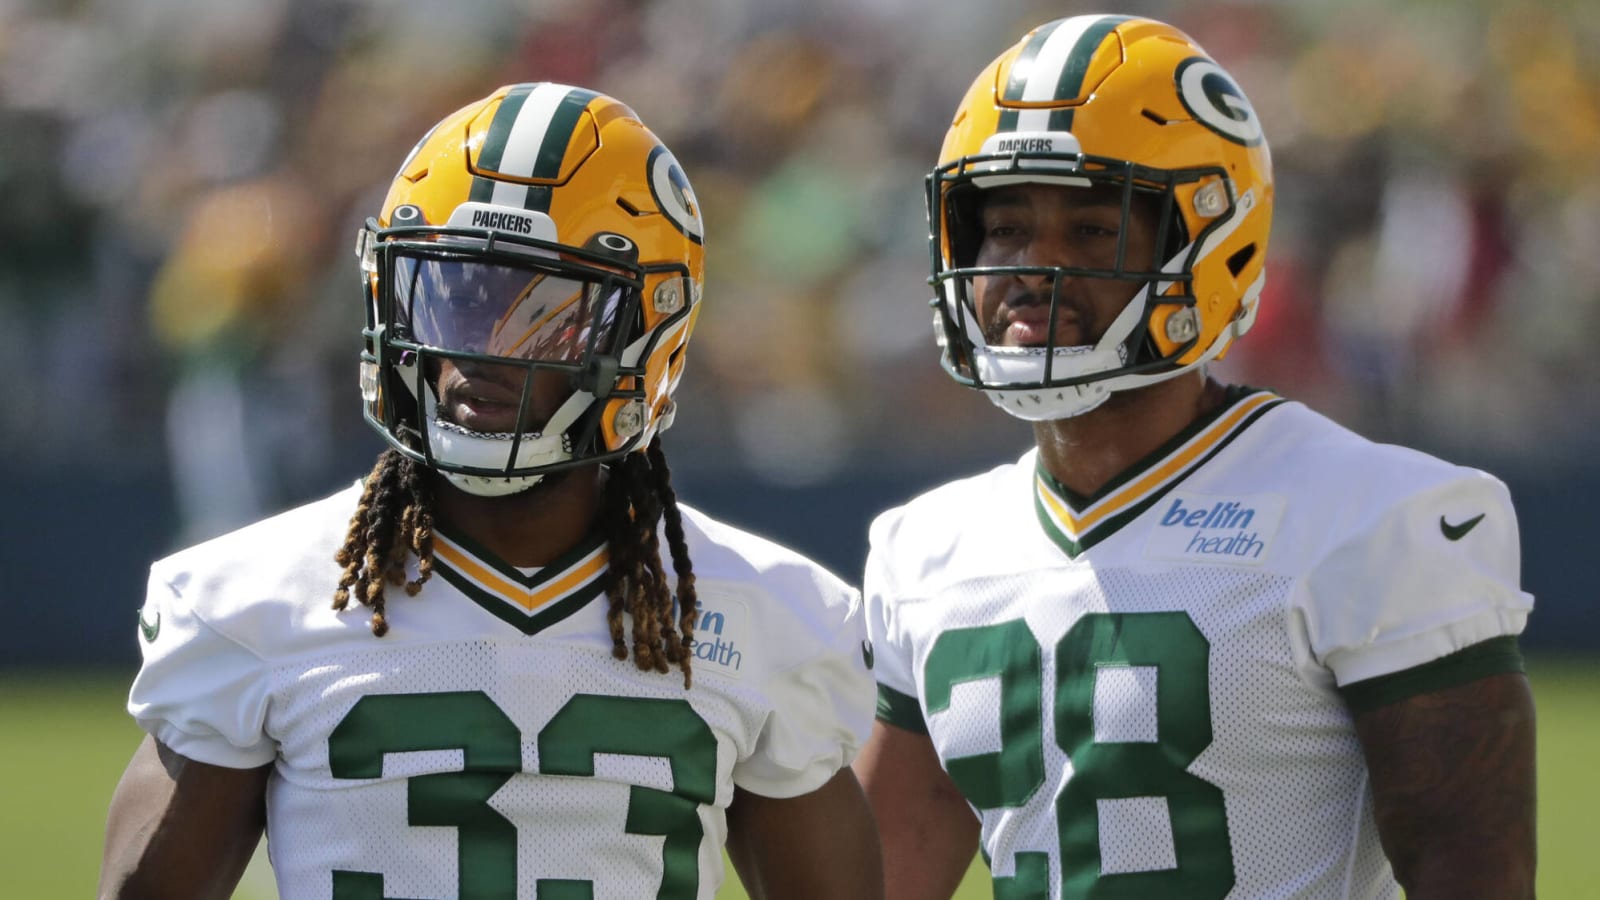 With Aaron Jones and A.J. Dillon, expect Packers to rush more